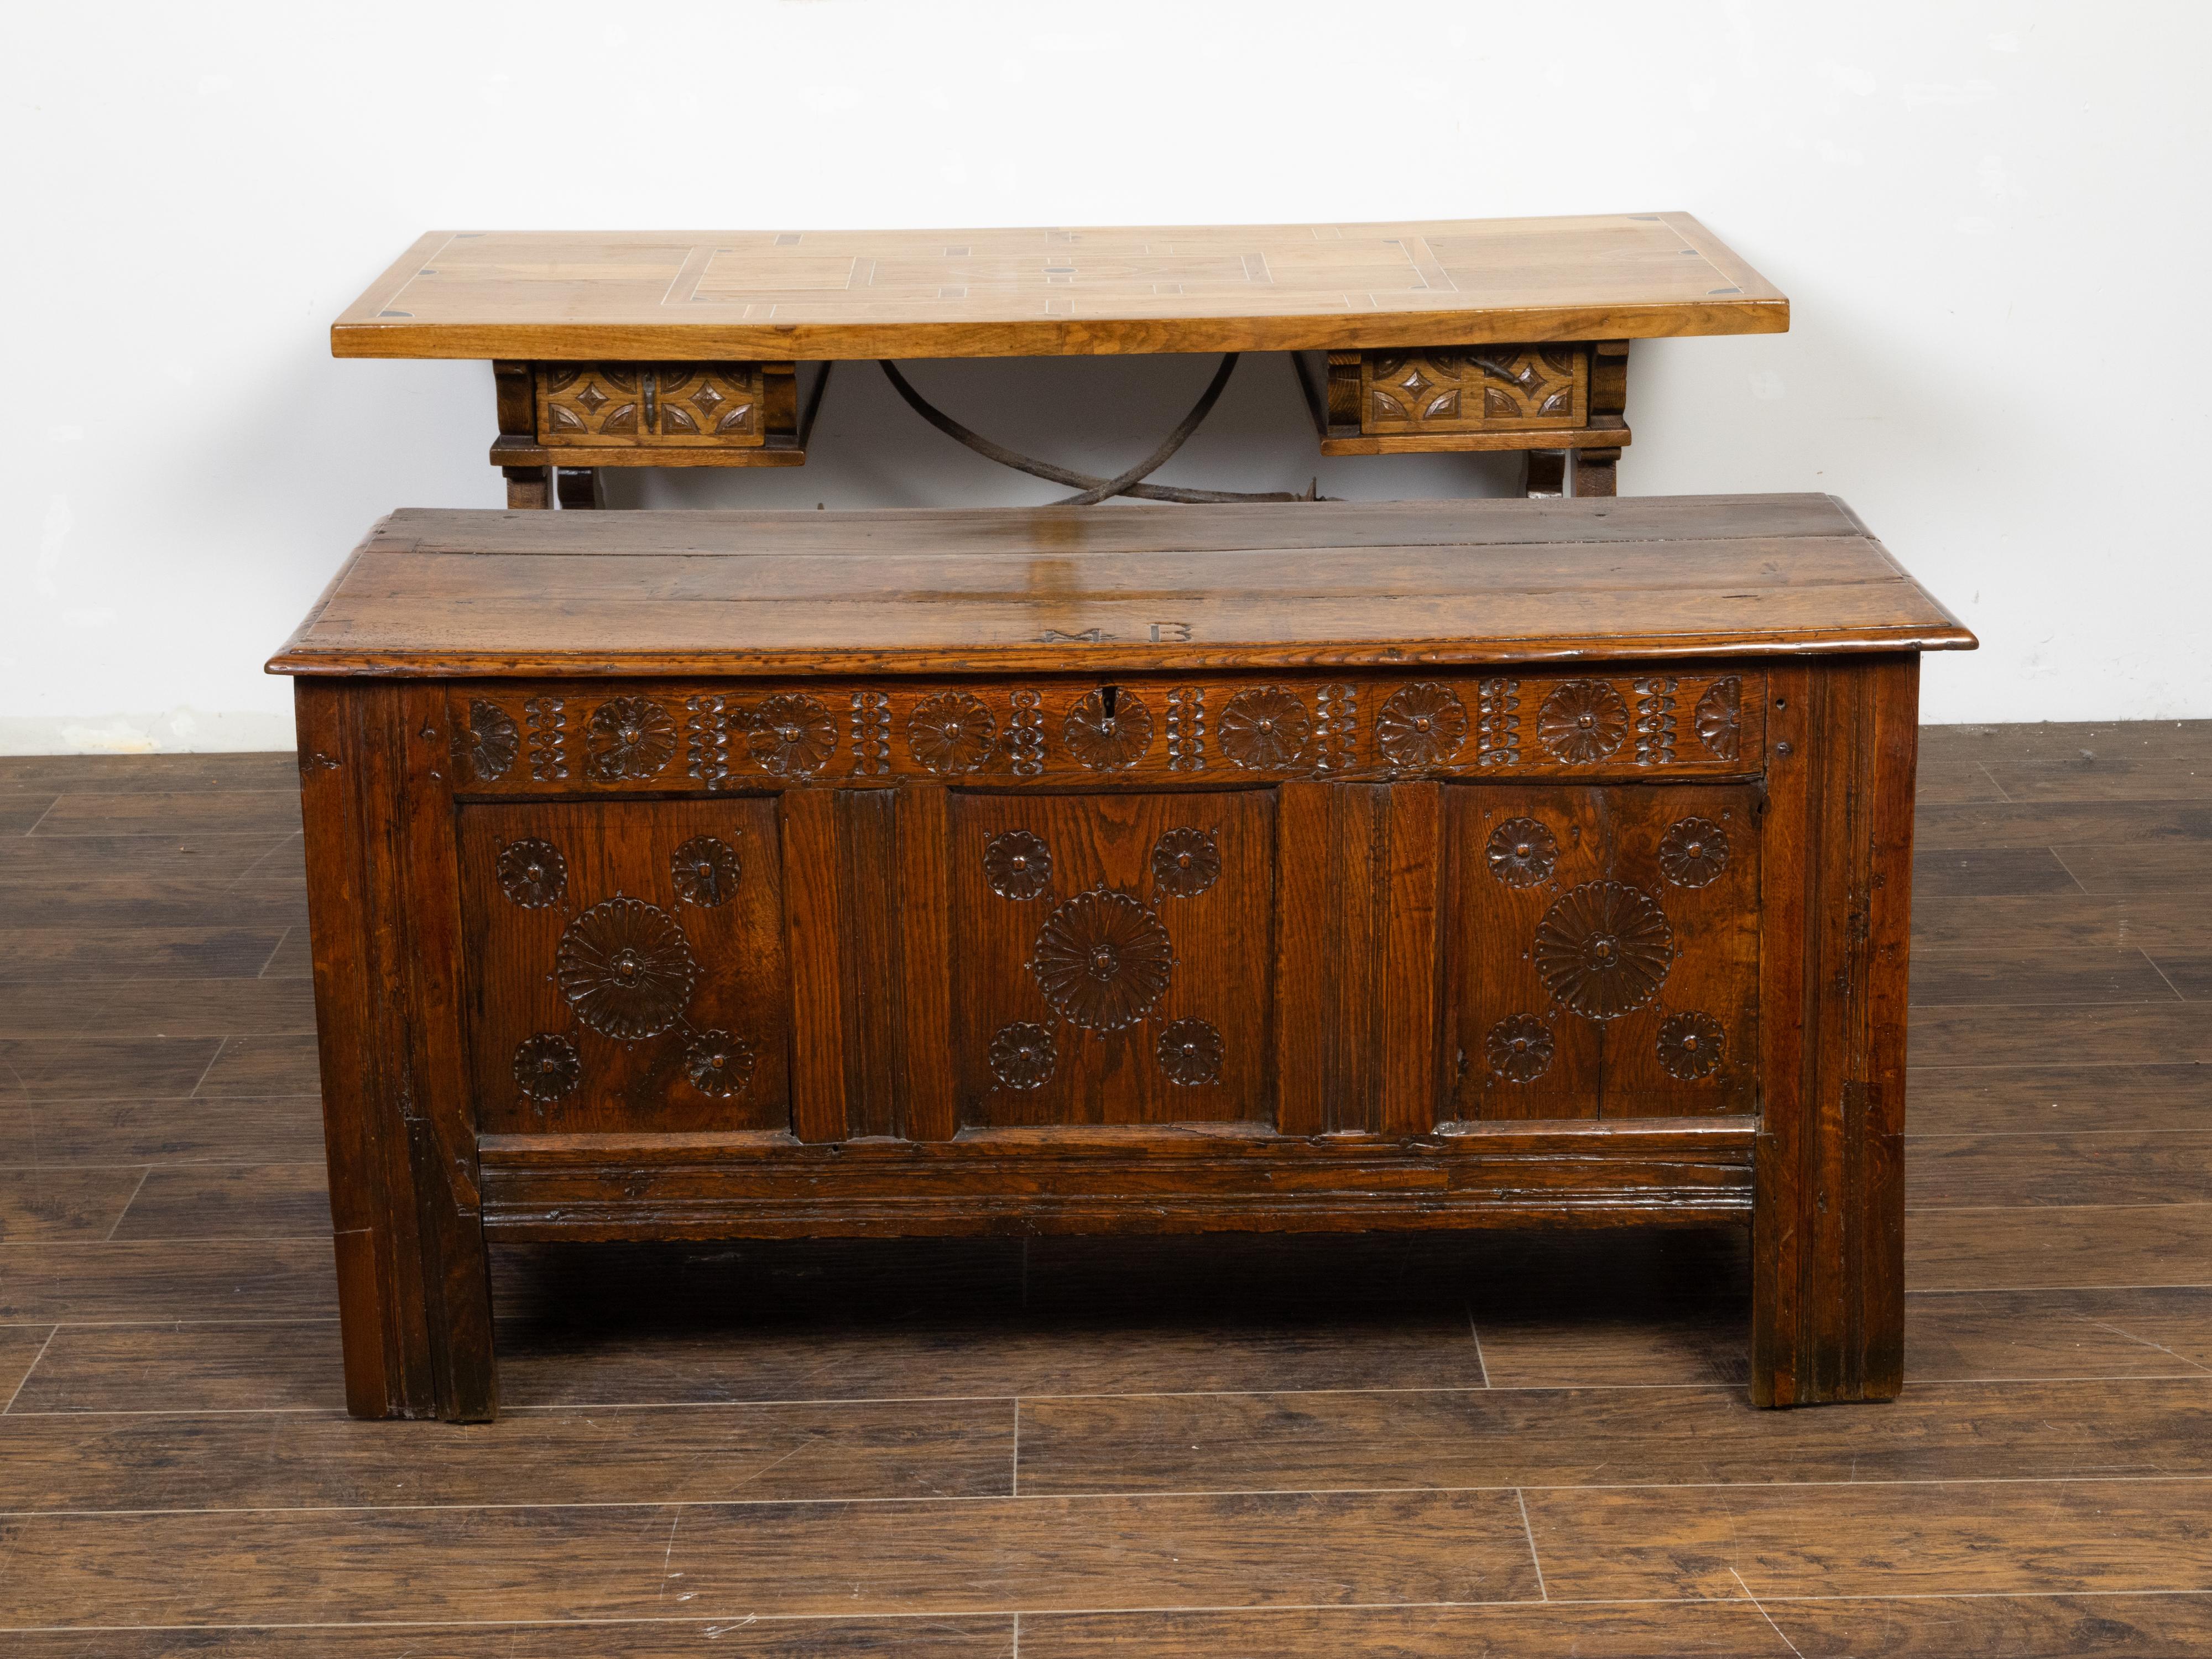 An English oak wedding coffer from the late 17th century, with carved rosettes and iron inlaid monogram. Created in England during the last quarter of the 17th century, this wedding coffer features a rectangular planked top inlaid in iron with the